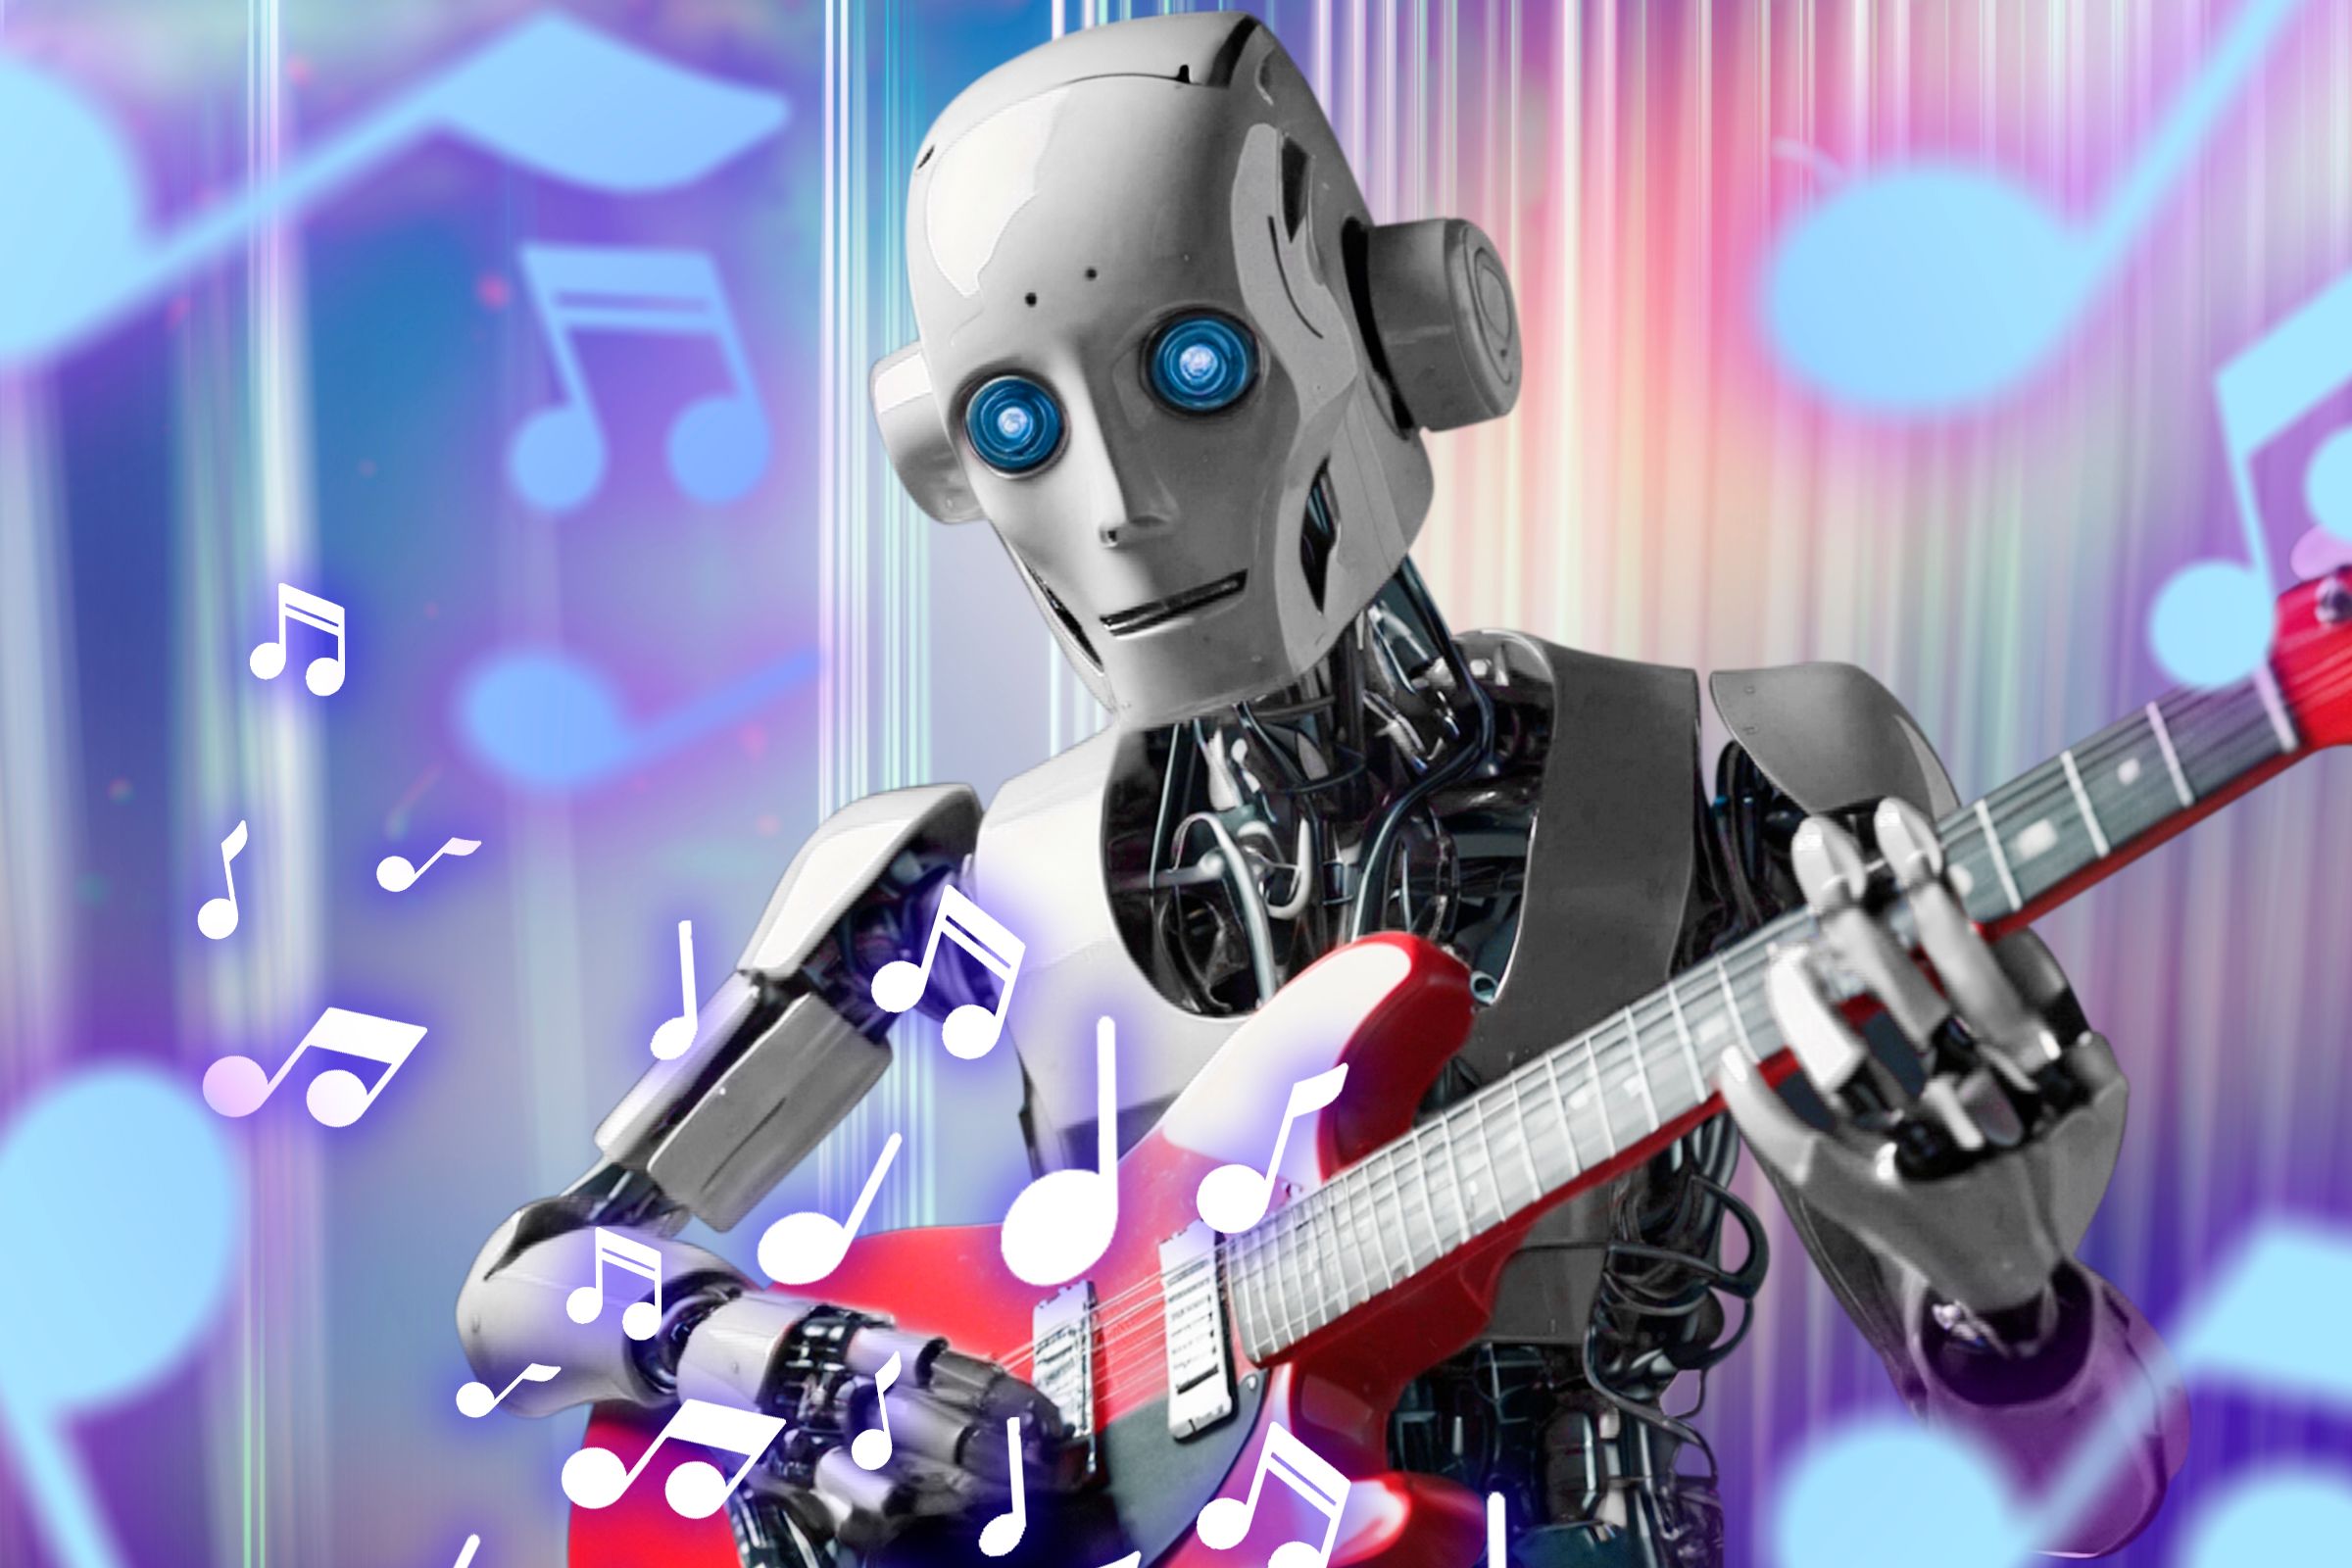 A Robot playing an eletric guitar and some music icons around.